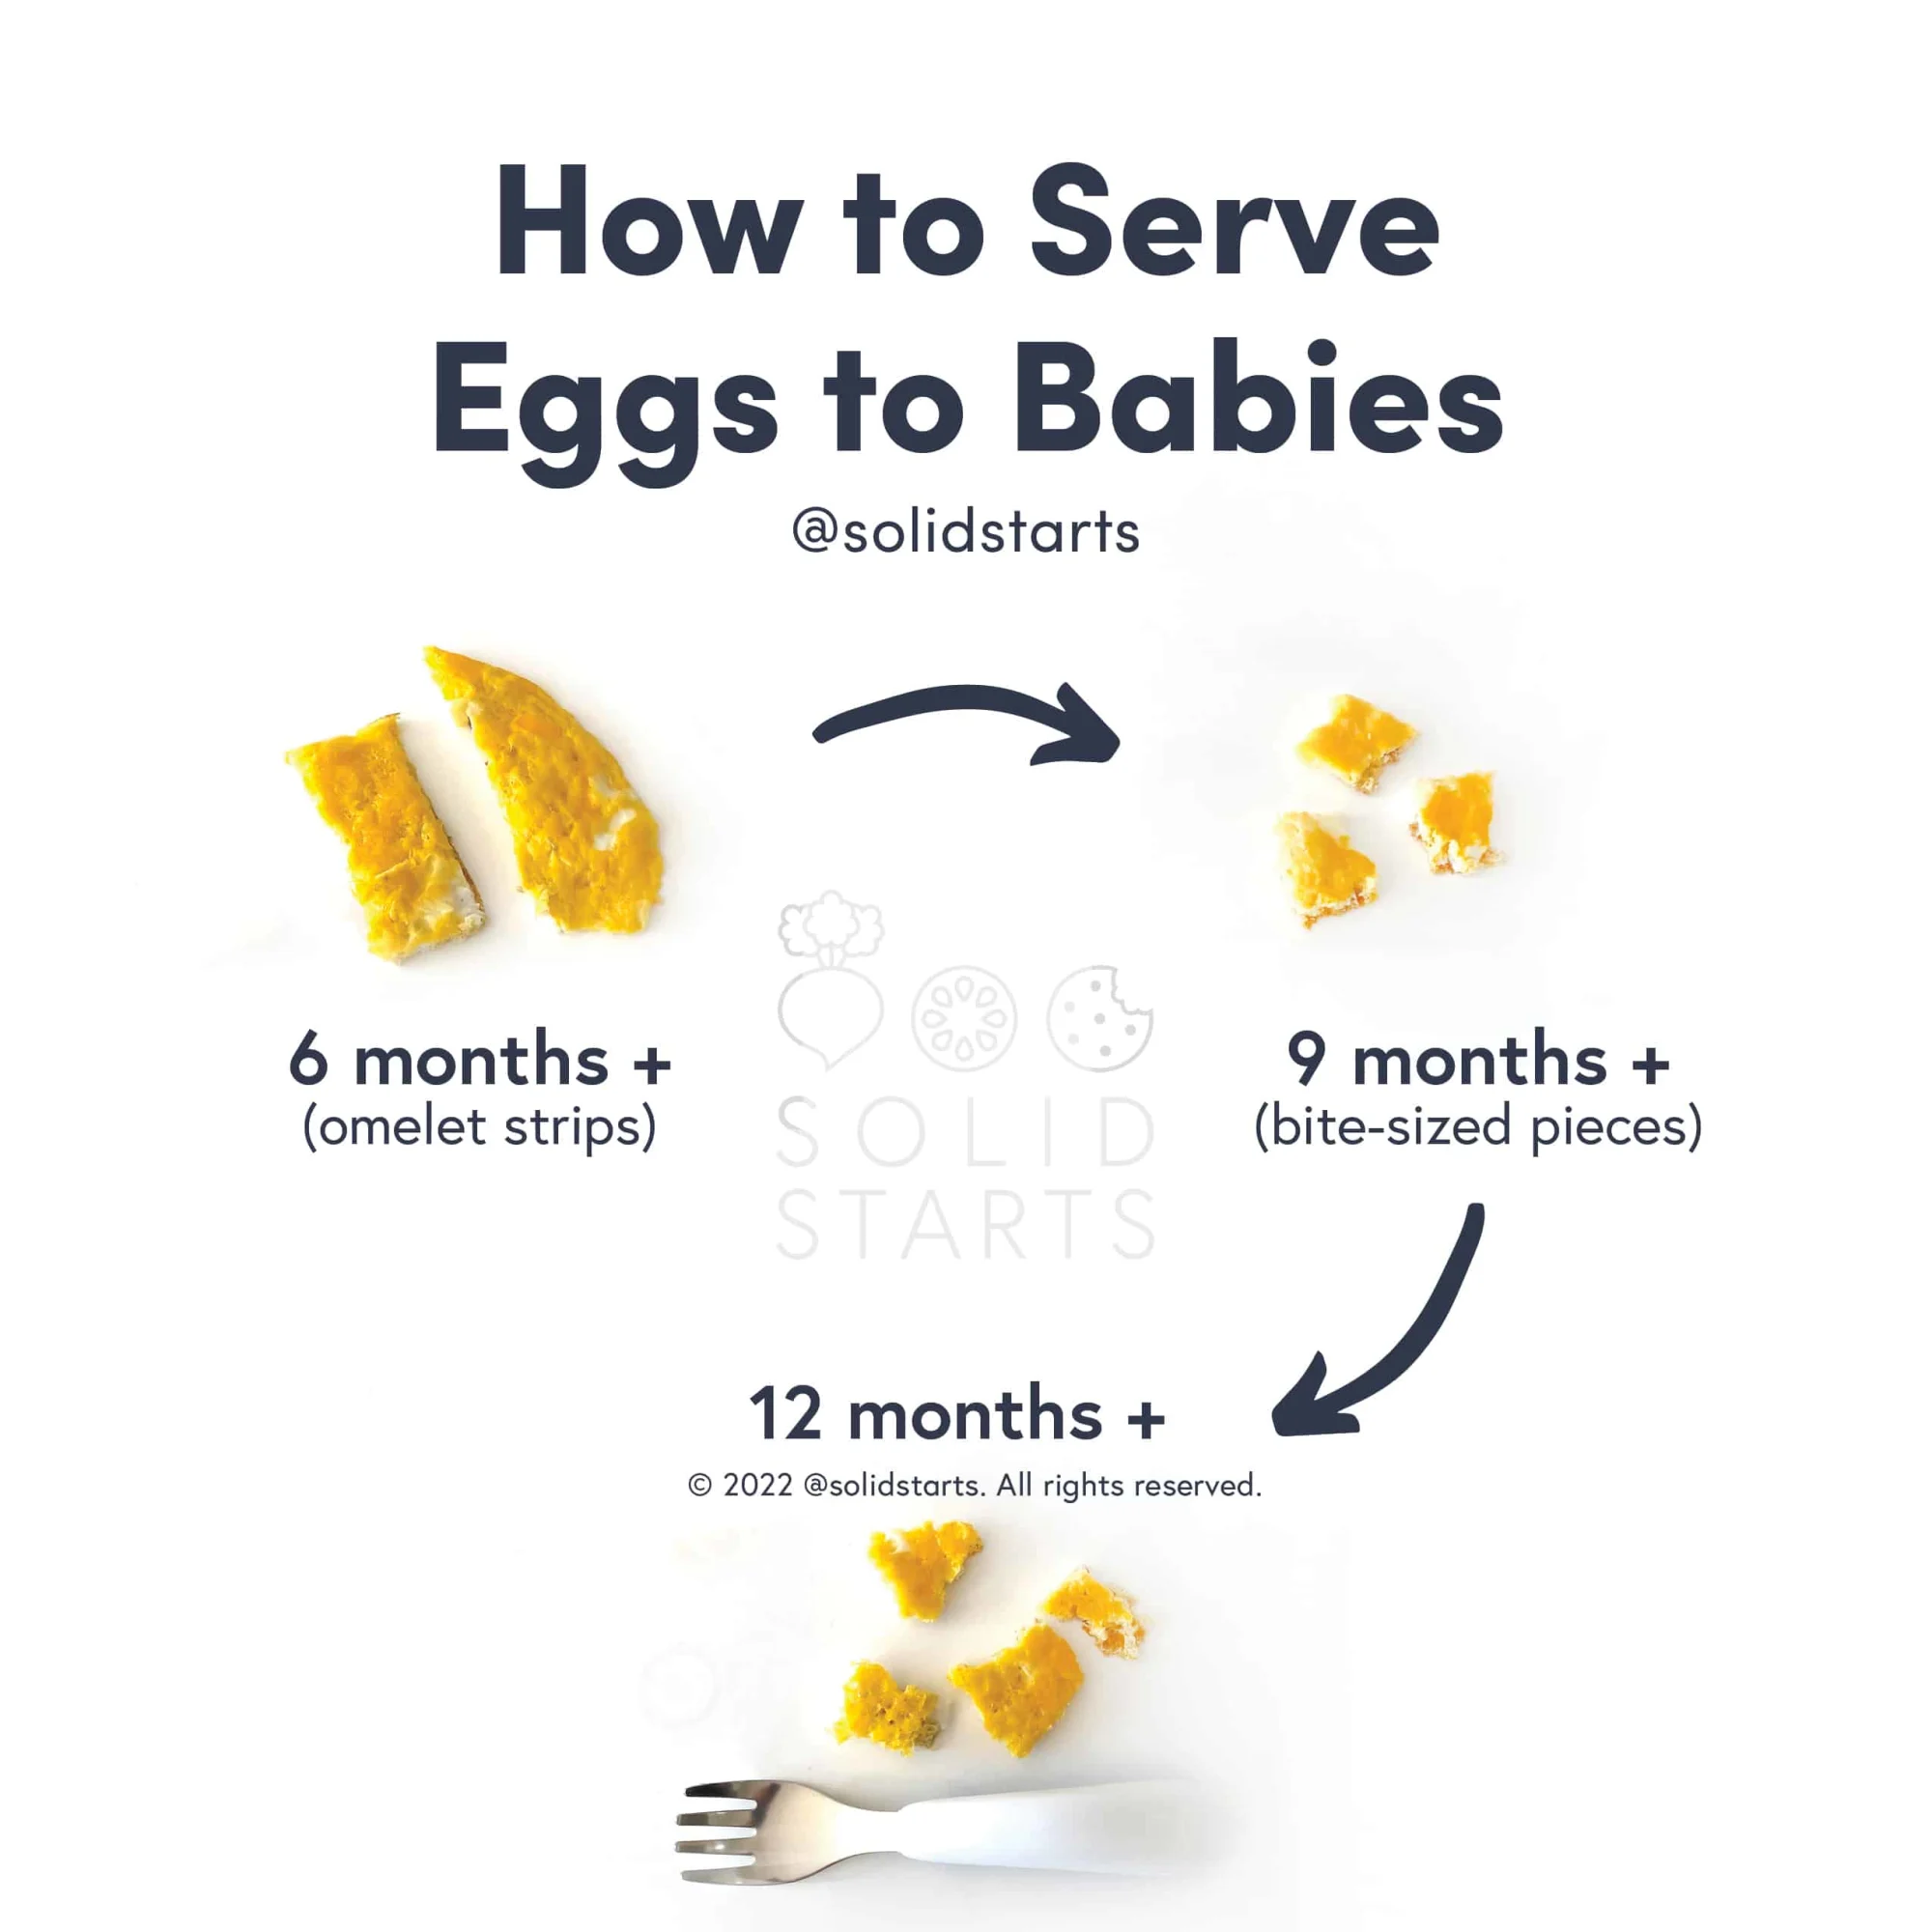 When Can Babies Eat Eggs? - Are Eggs Safe for Babies?